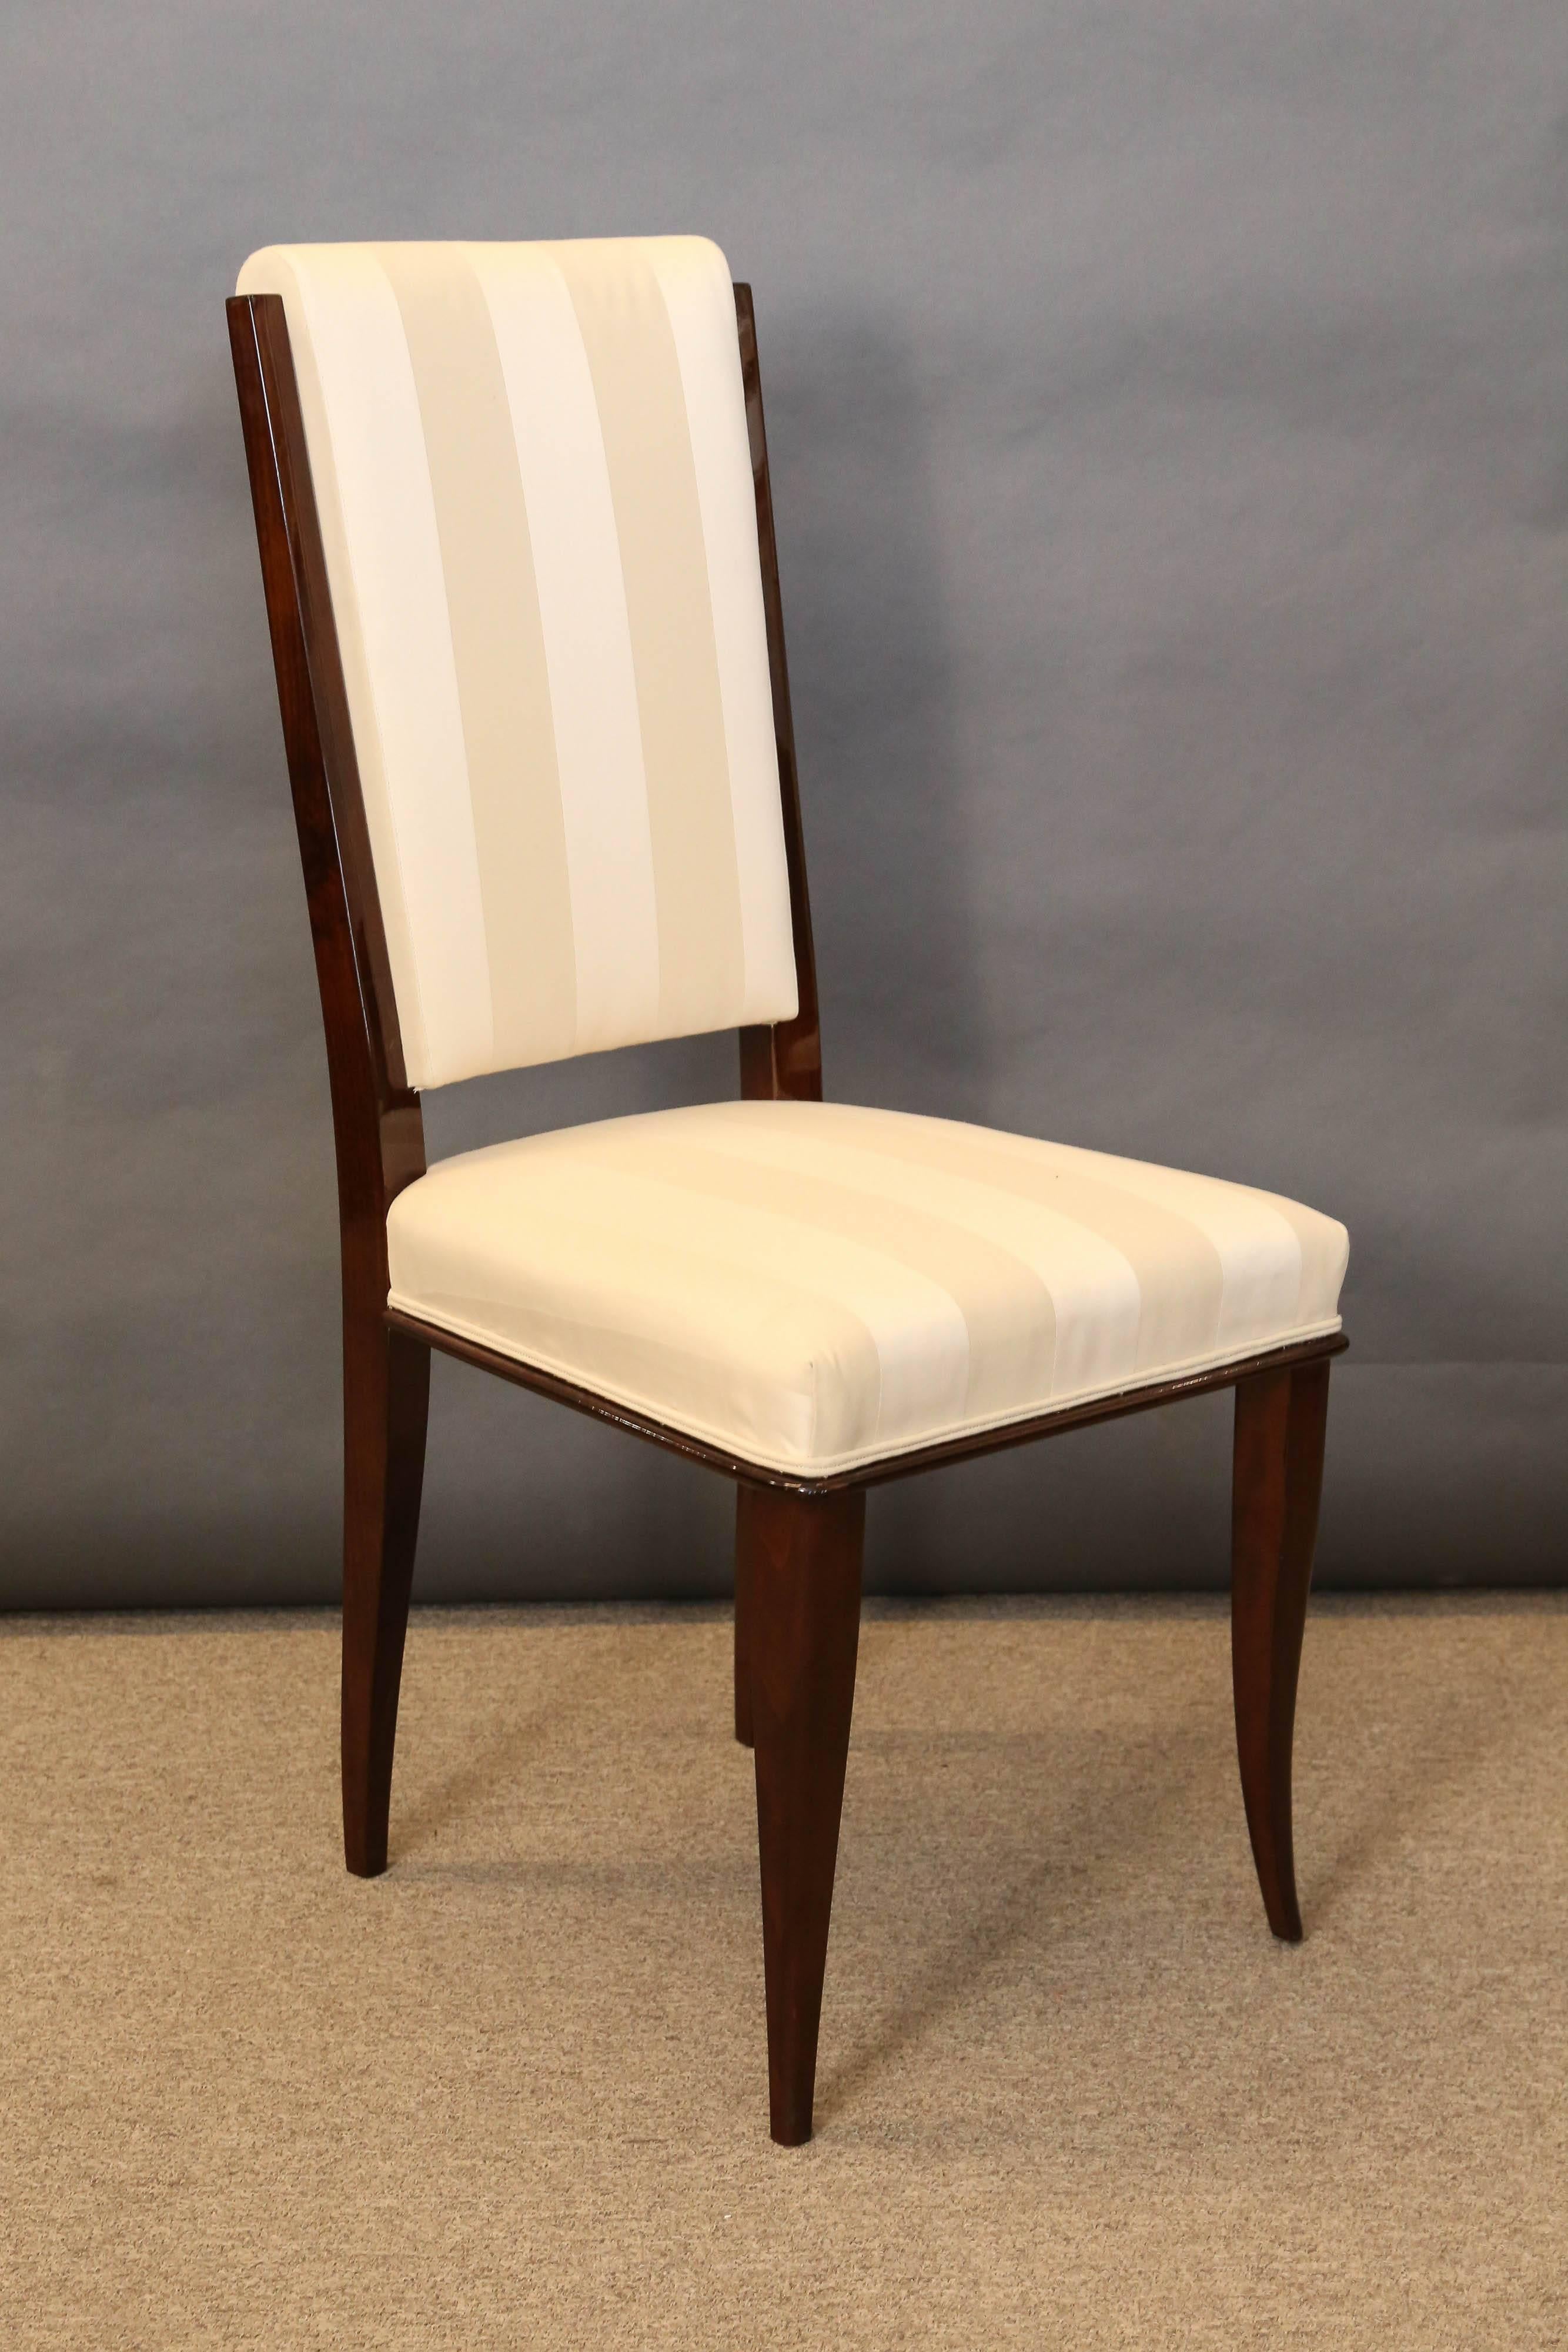 Chairs are newly re-upholstered in a light striped fabric. Back support is separated from the sit. Top of the back part is curved. Body of each chair is made out of height quality walnut wood.
Each chair is elevated by two slightly curved front